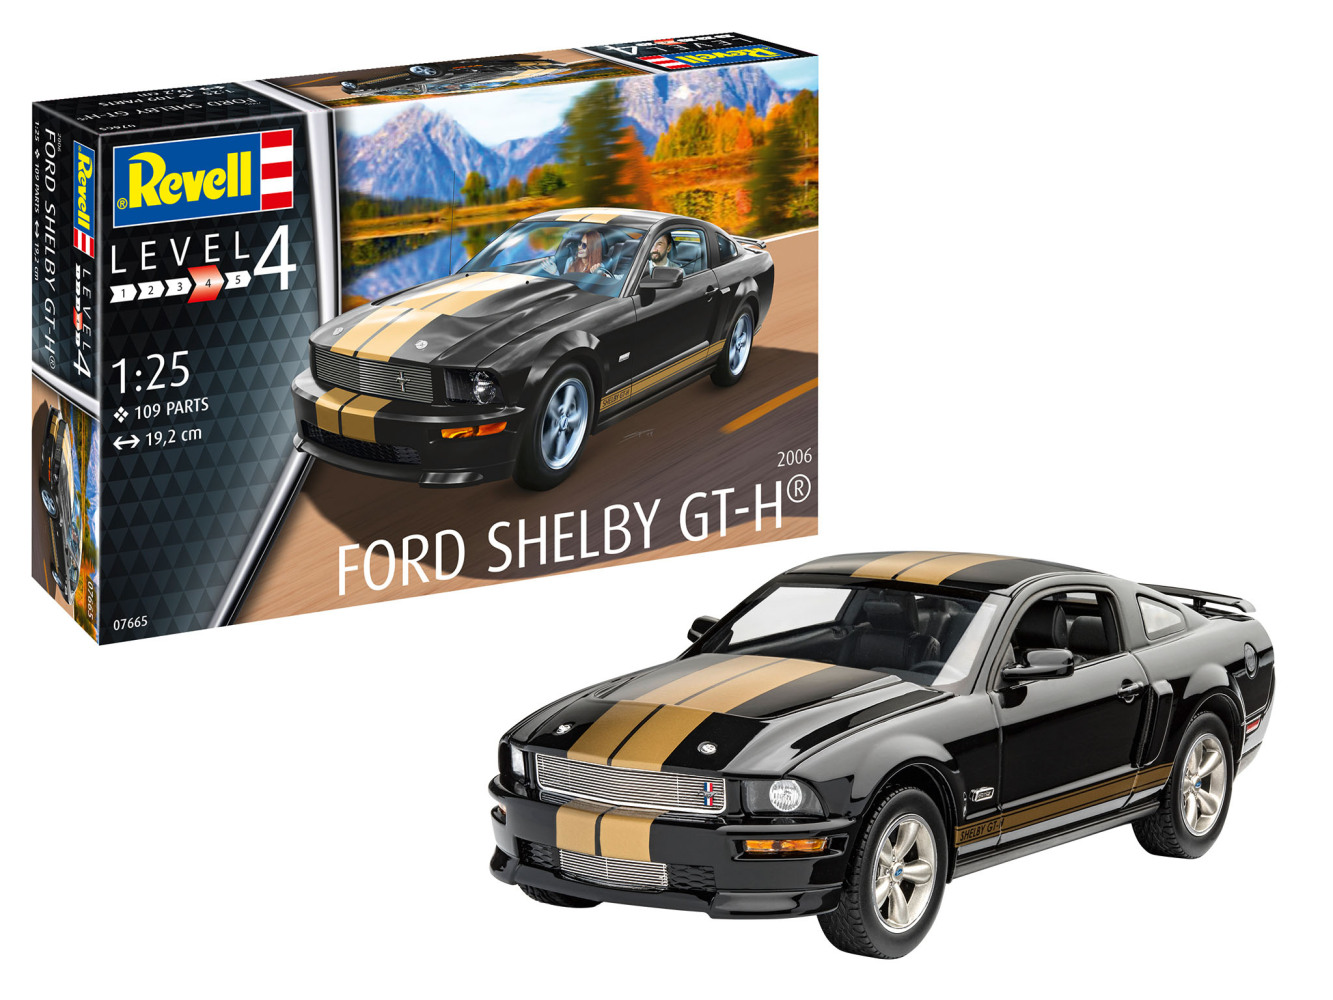 2006 Ford Shelby GT-H 